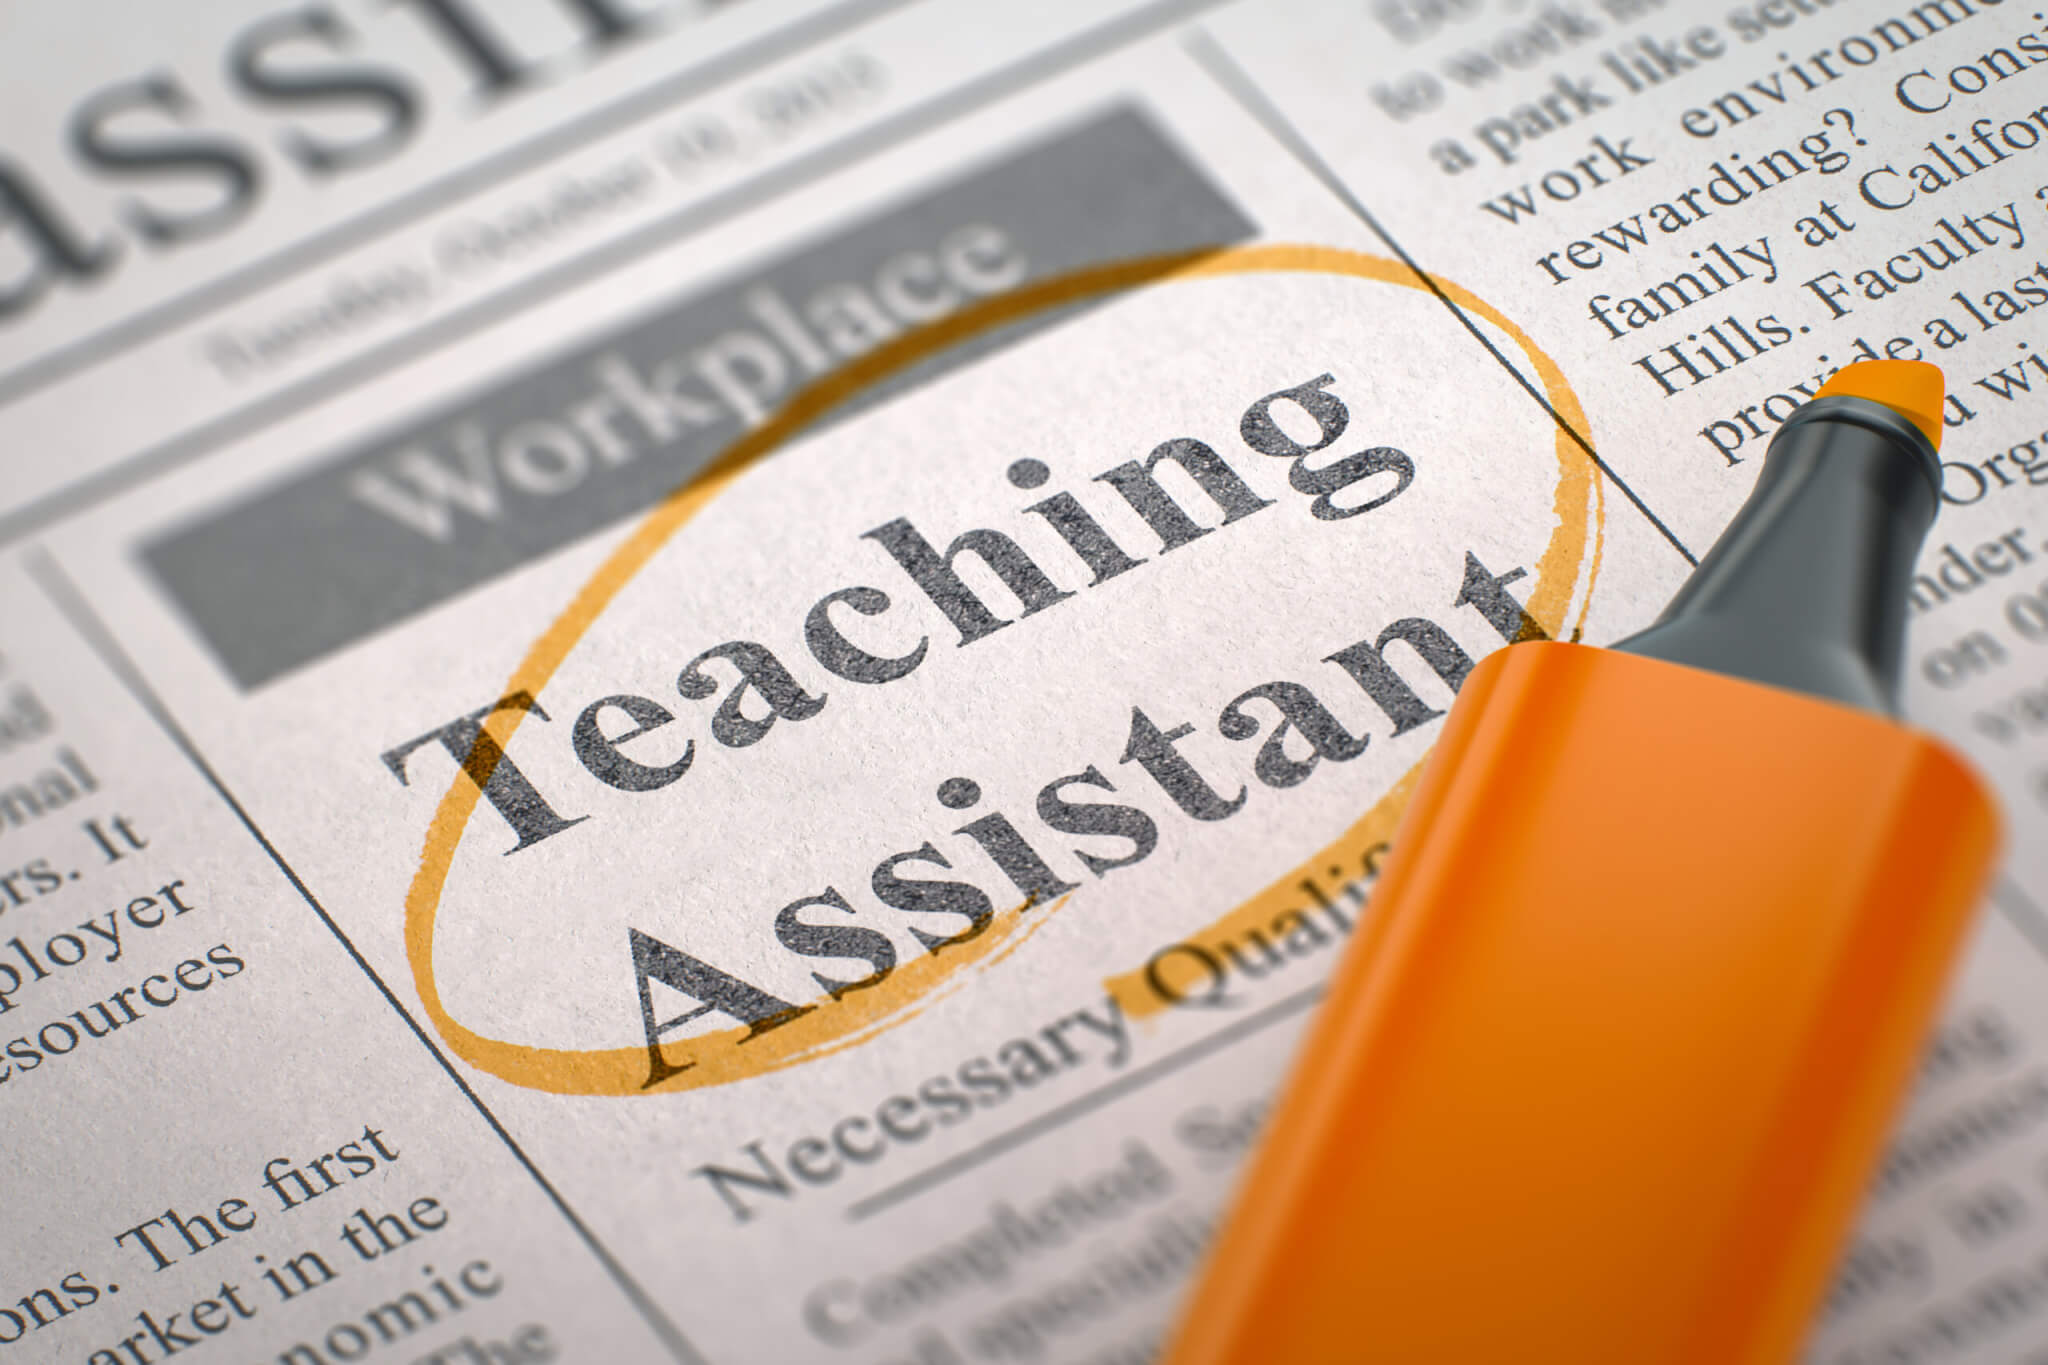 Teaching assistant newspaper classified ad